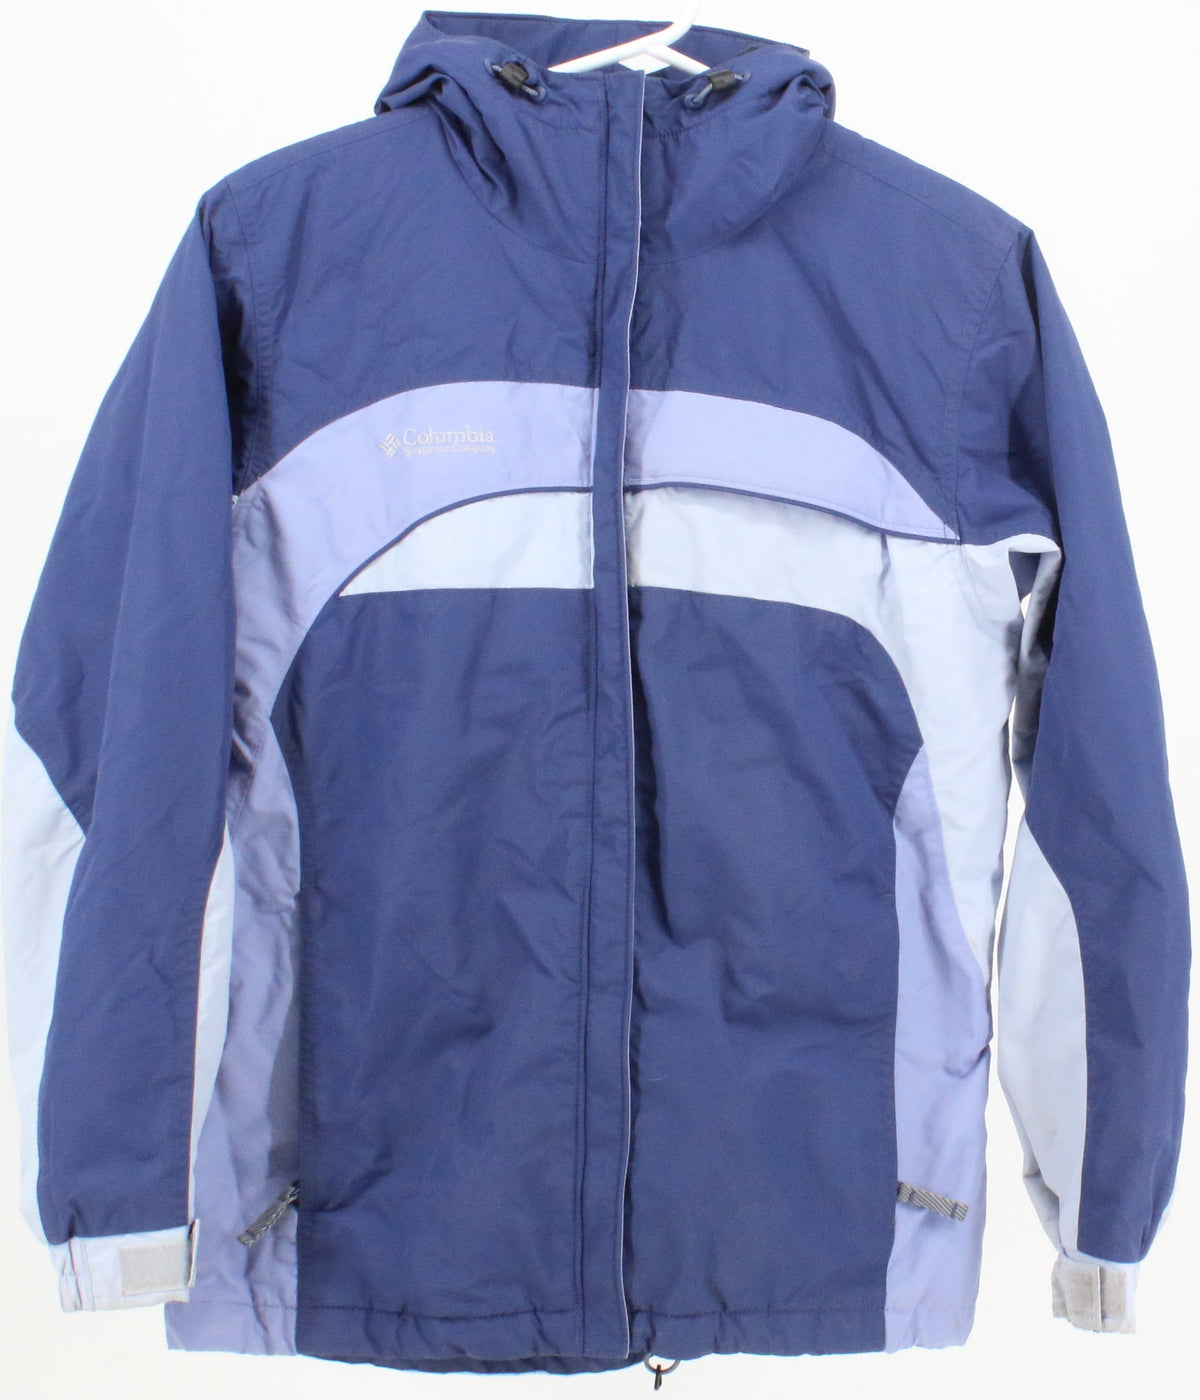 Columbia Women's Blue Shades Insulated Jacket